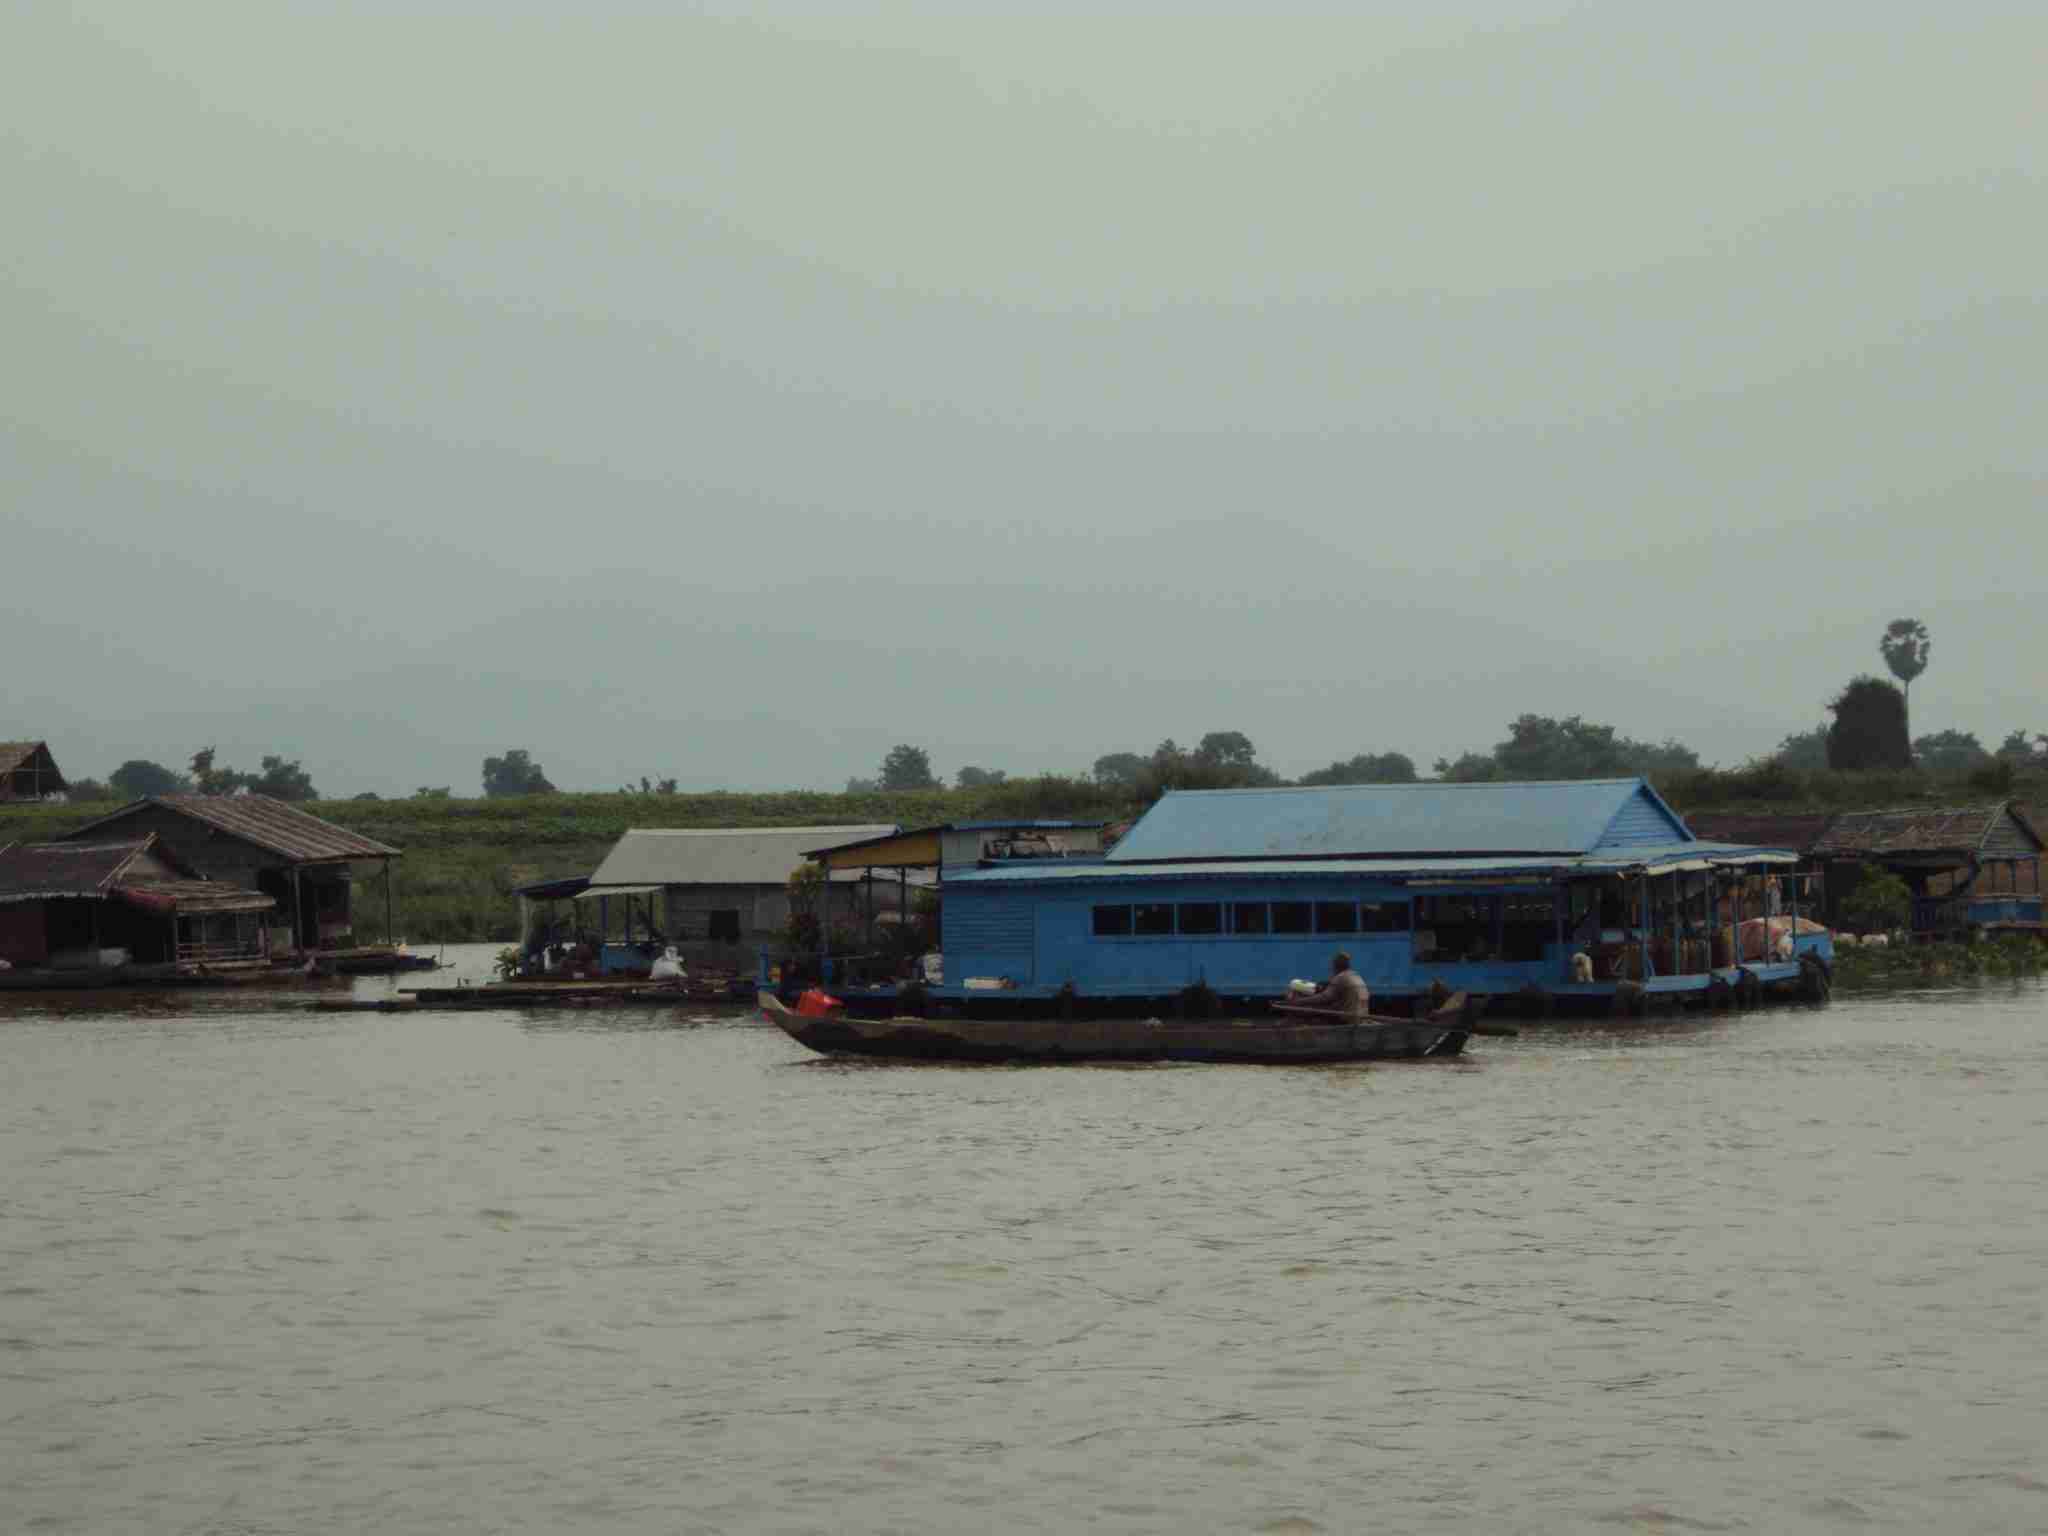 The shore of the Mekong